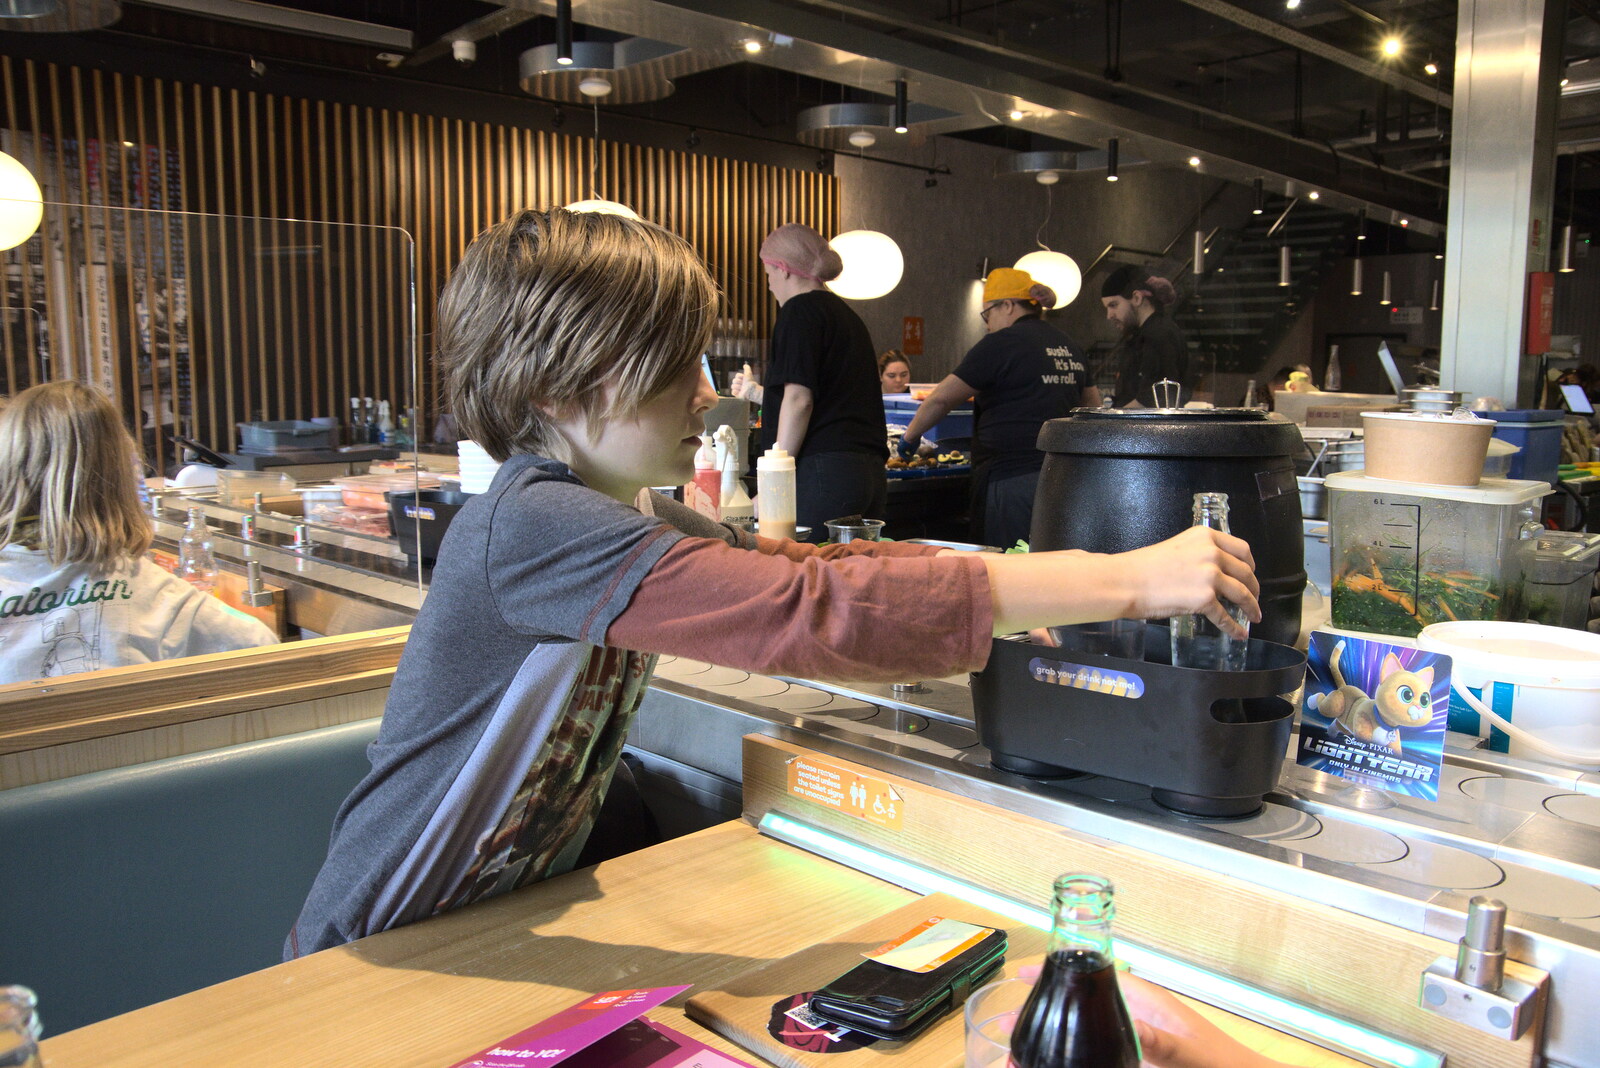 Lunch at Yo! Sushi, Norwich, Norfolk - 19th June 2022: Harry reaches out for the conveyor belt